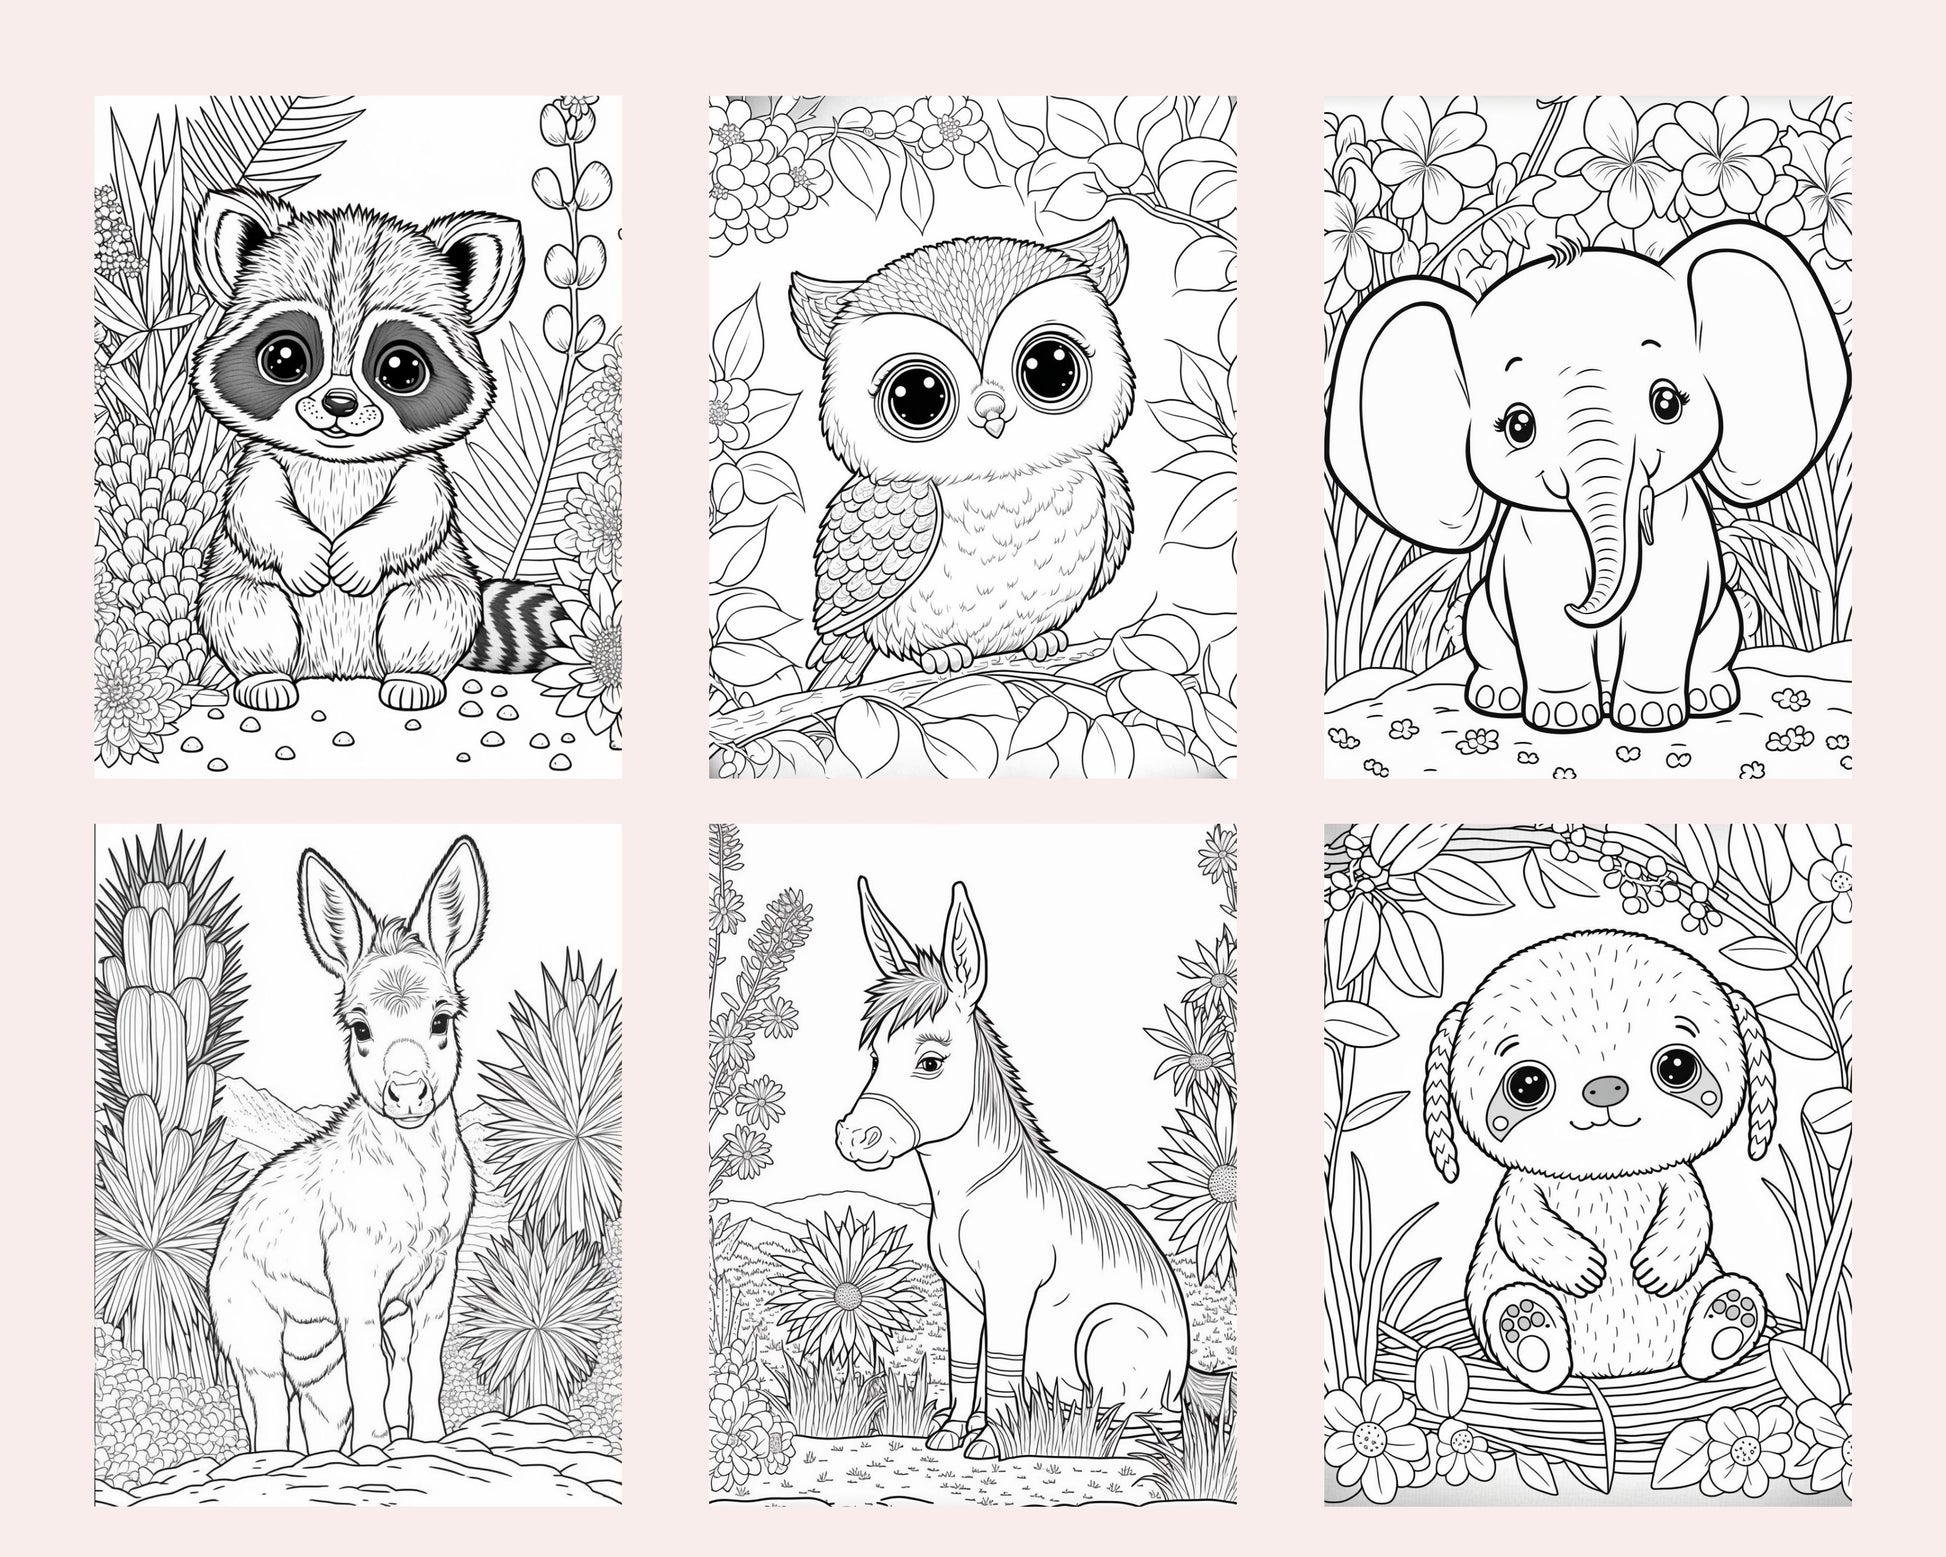 Cute animals printable coloring pages for kids printable pdf file â coloring